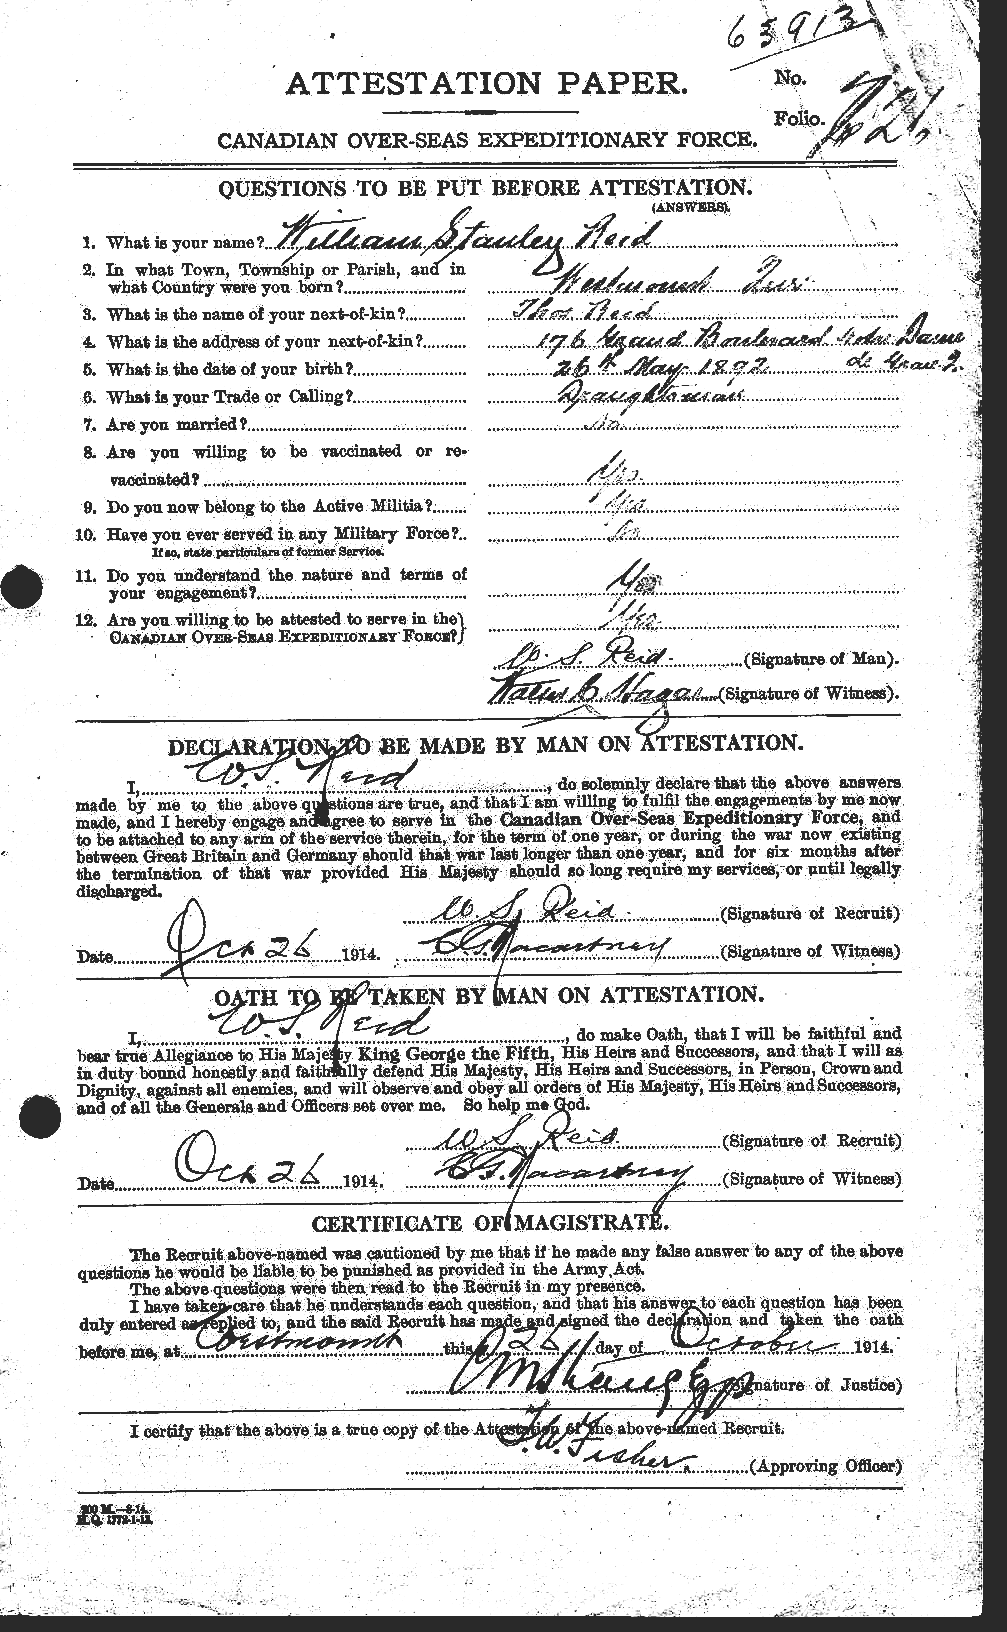 Personnel Records of the First World War - CEF 597035a